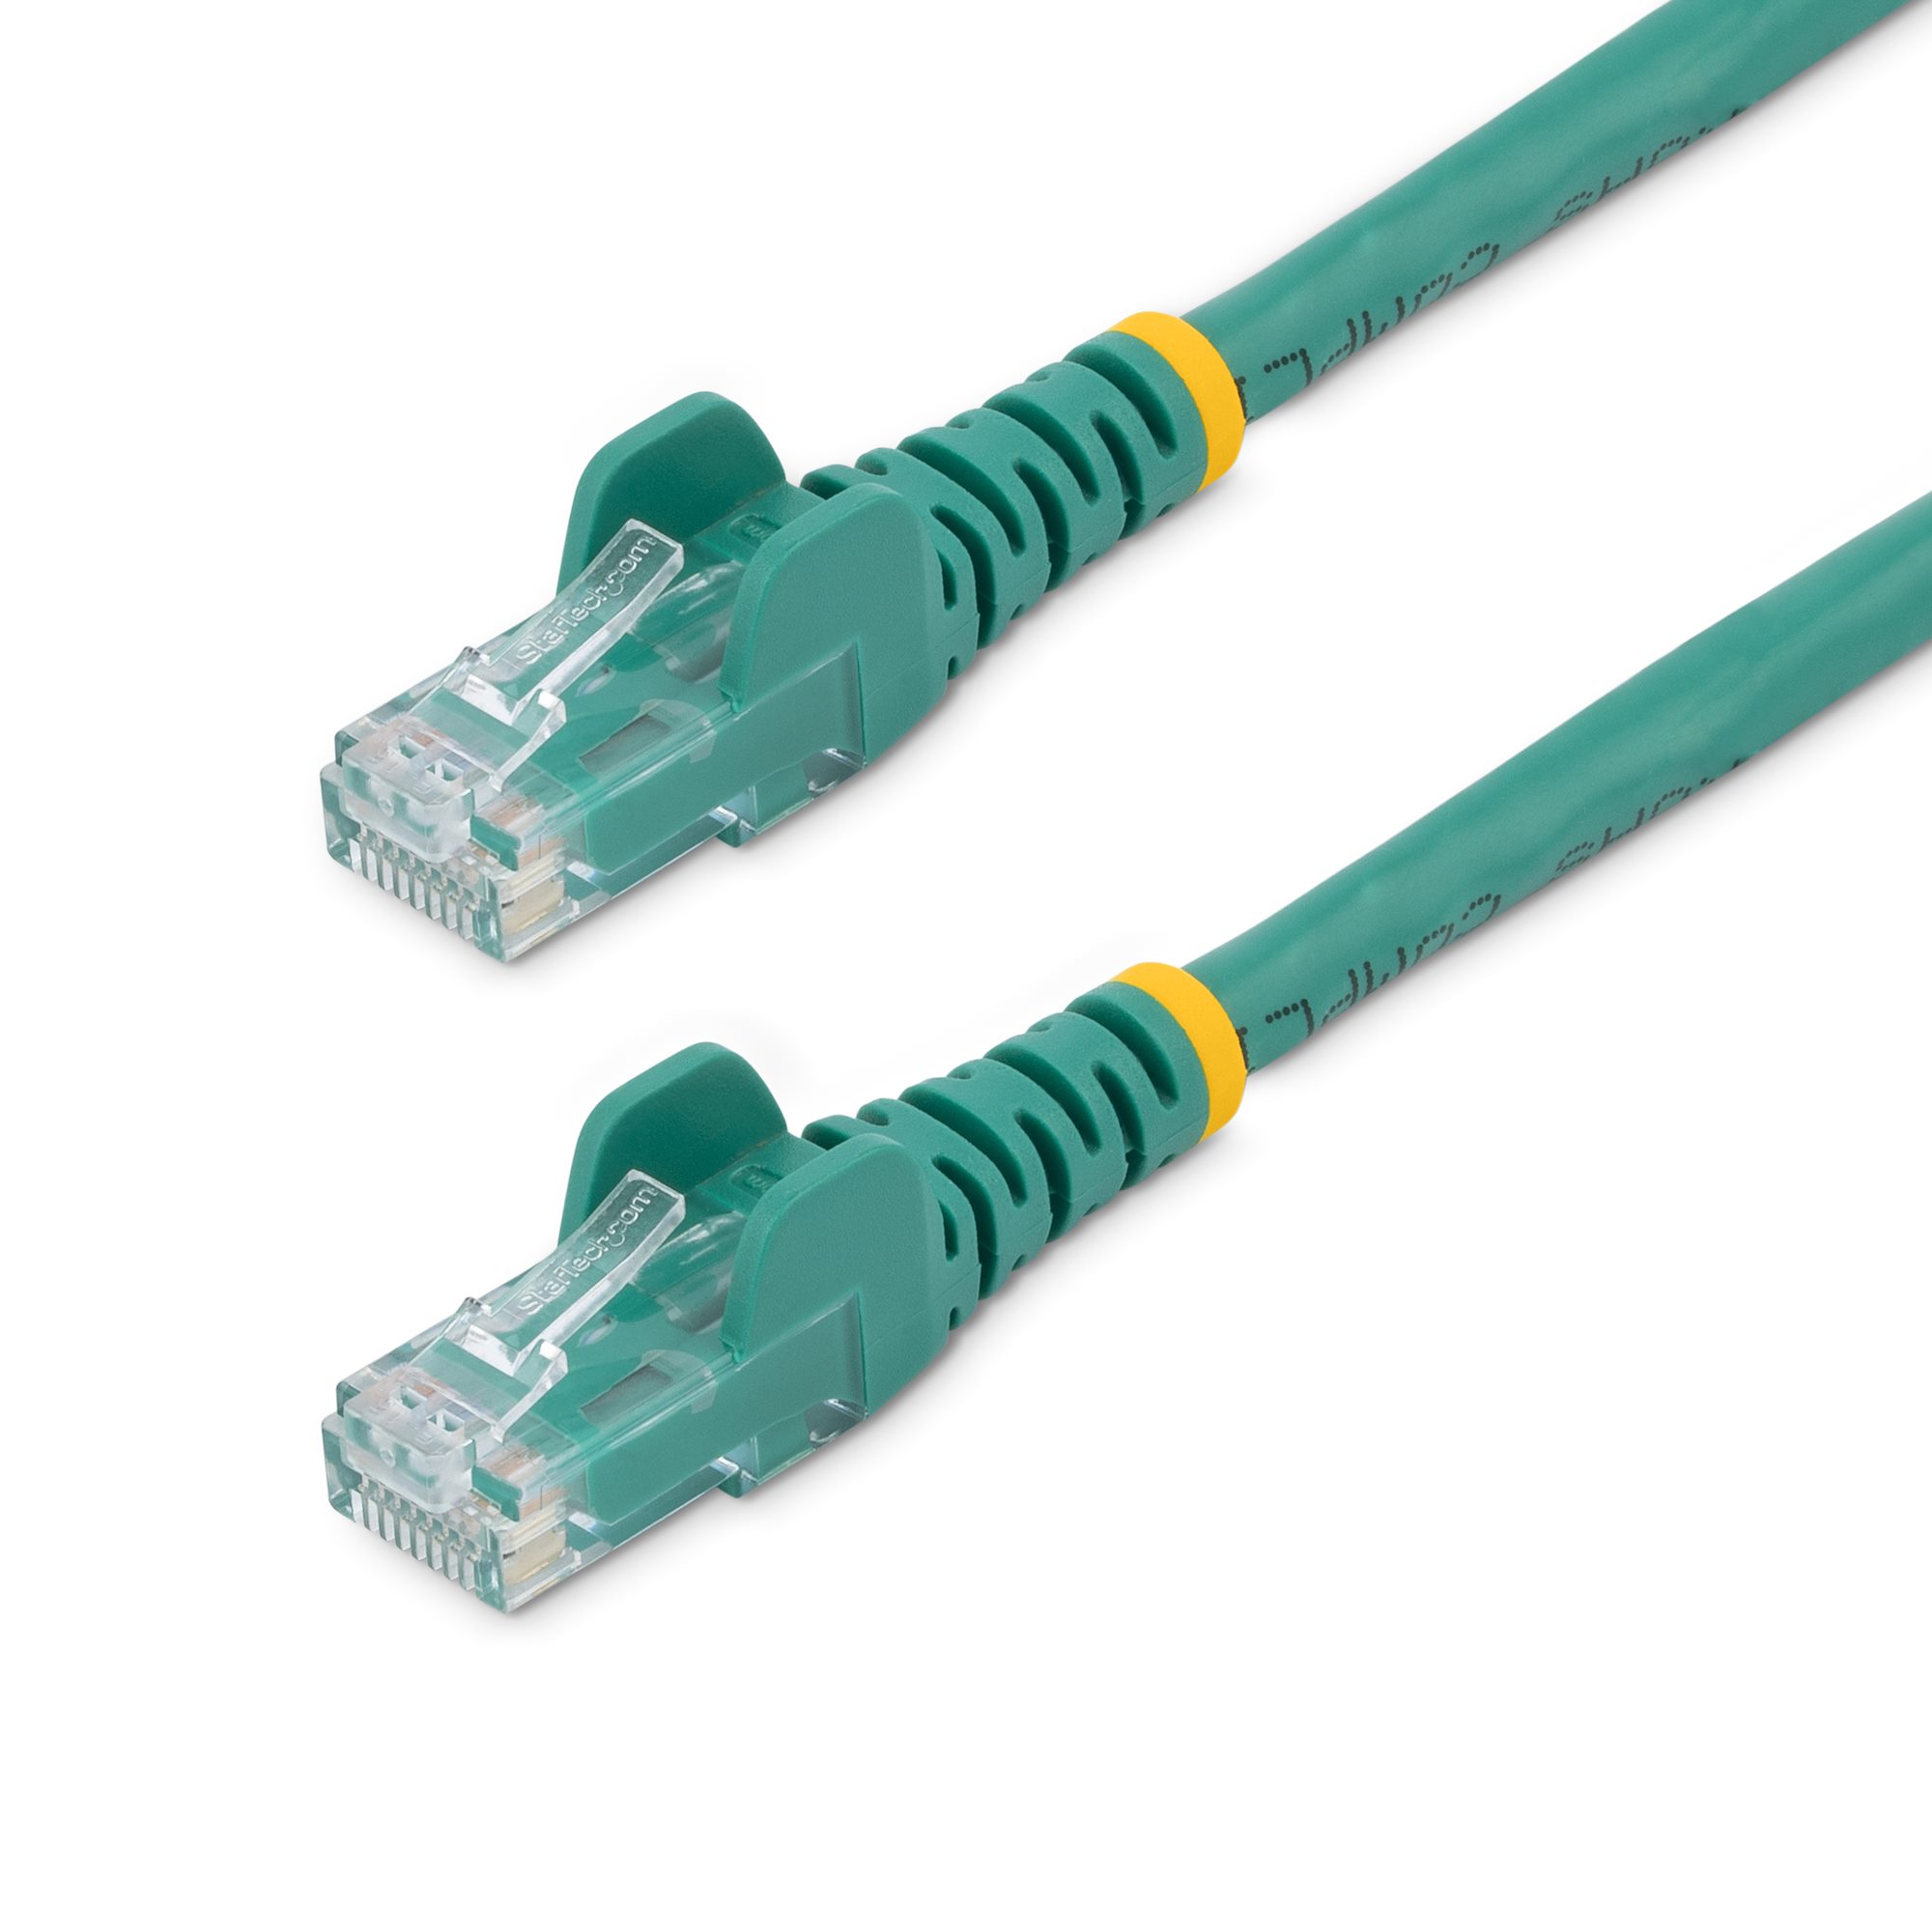 2m CAT6 Ethernet Cable - Green CAT 6 Gigabit Ethernet Wire -650MHz 100W PoE  RJ45 UTP Network/Patch Cord Snagless w/Strain Relief Fluke Tested/Wiring